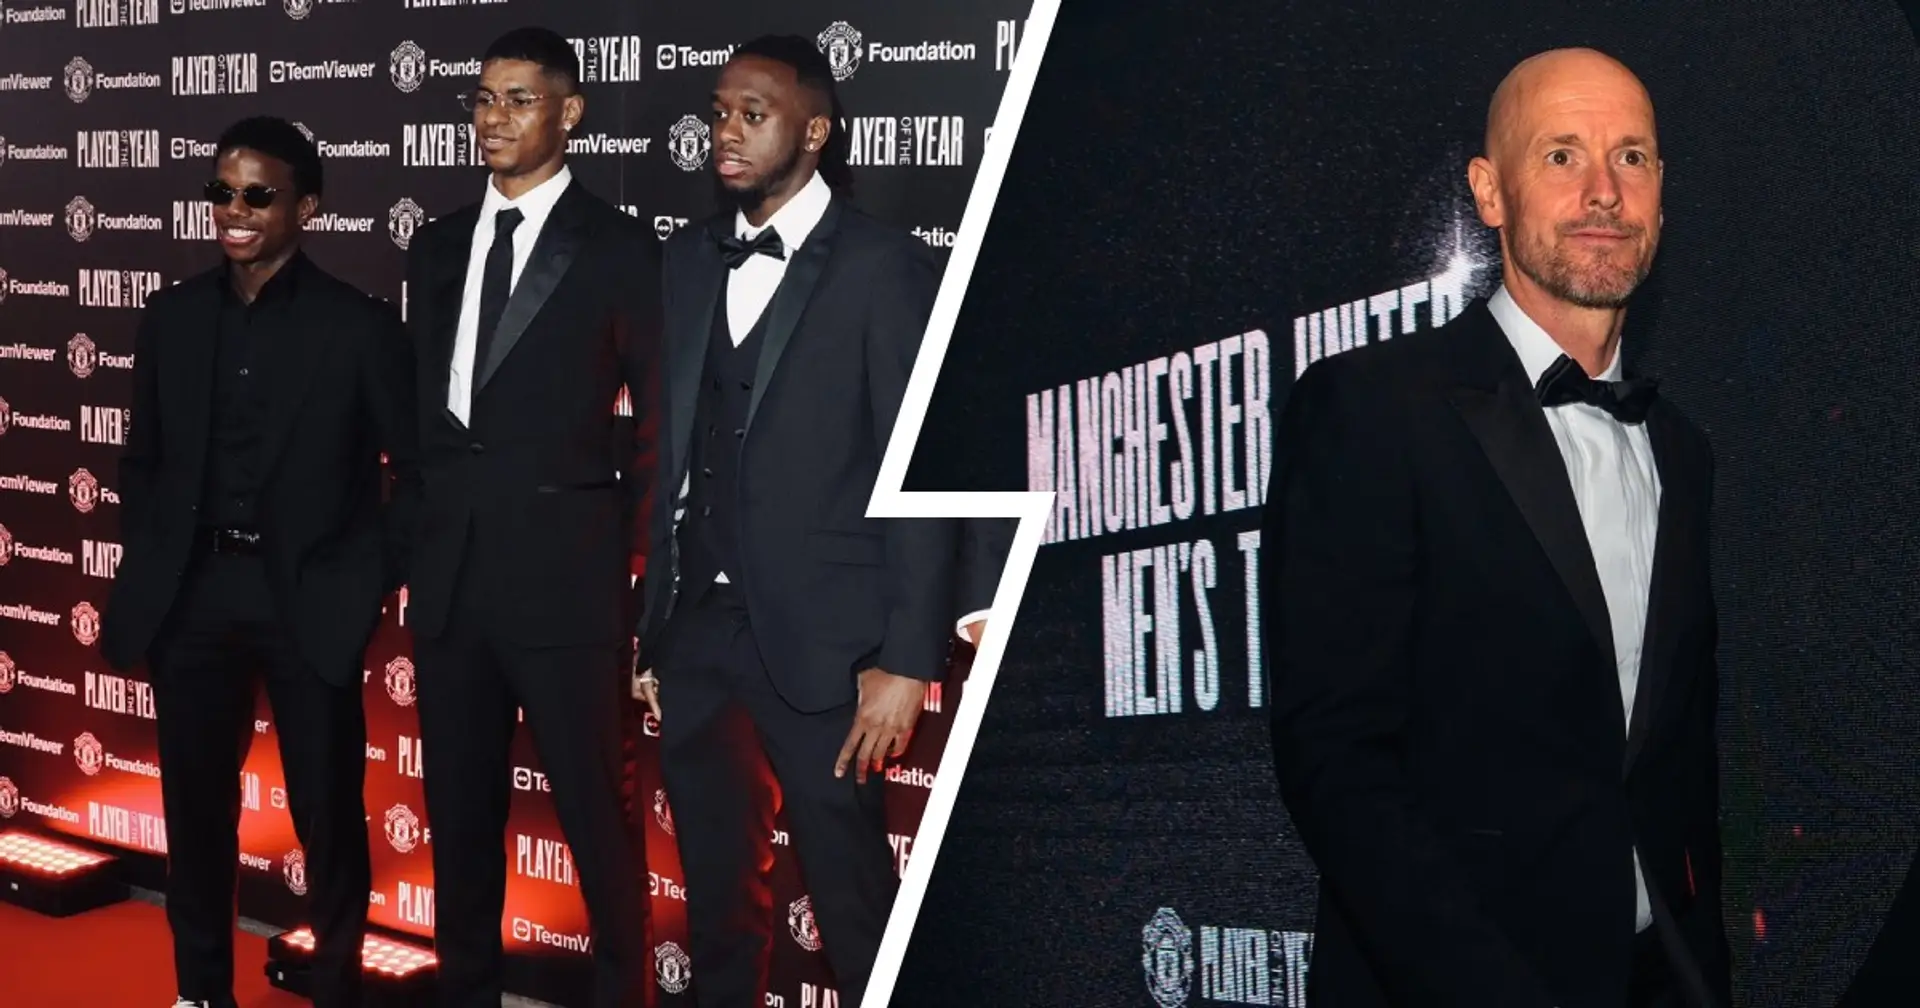 5 best pictures from Man United's end of season awards